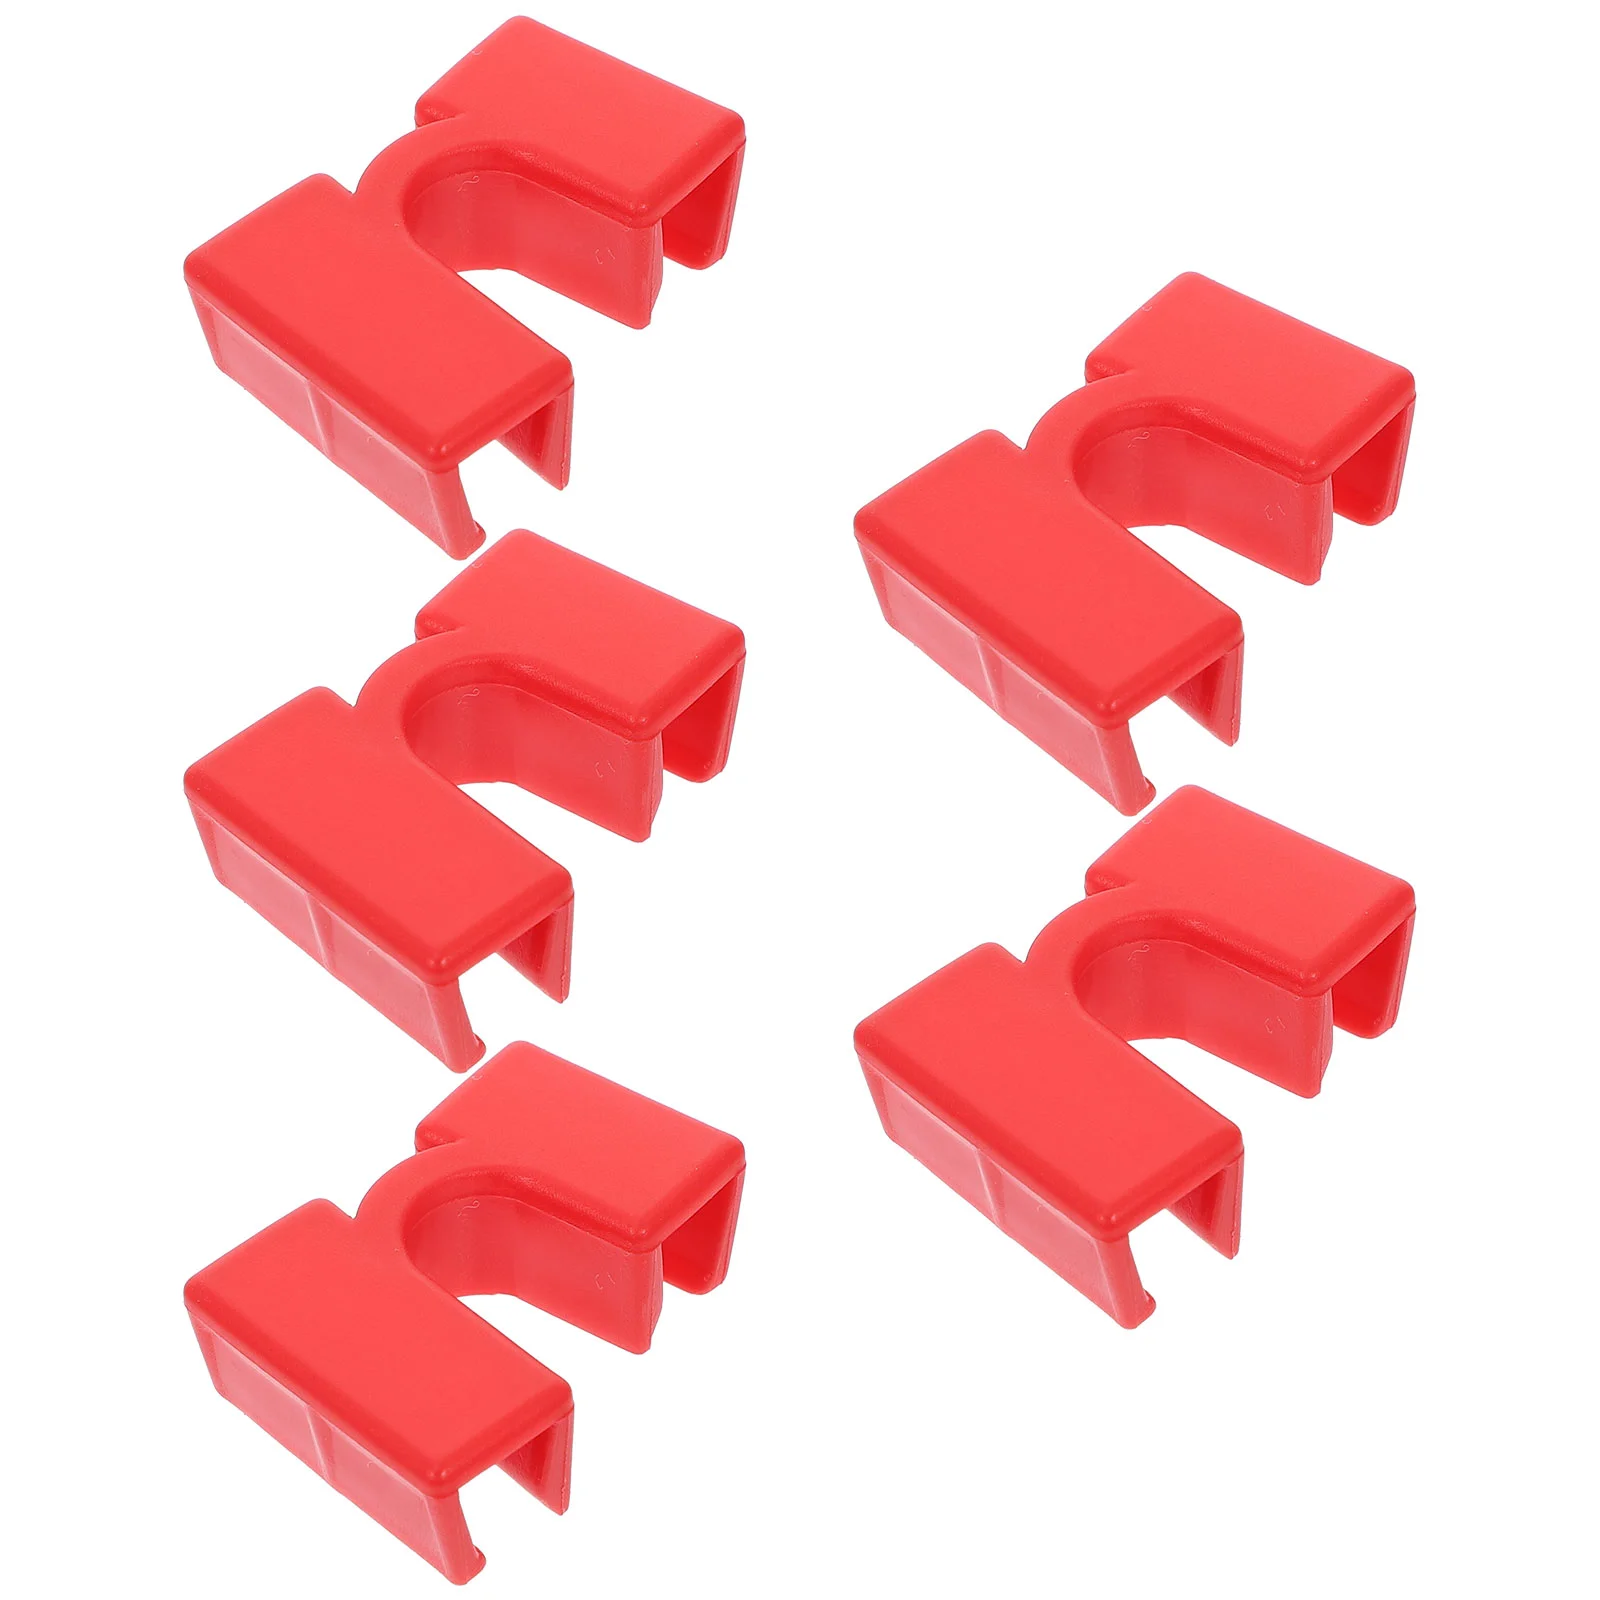 

Chopsticks Chopstick Training Clips Kids Helpers Helper Beginners Plastic Connector Aid Covers Trainer Children Hinges Clamps